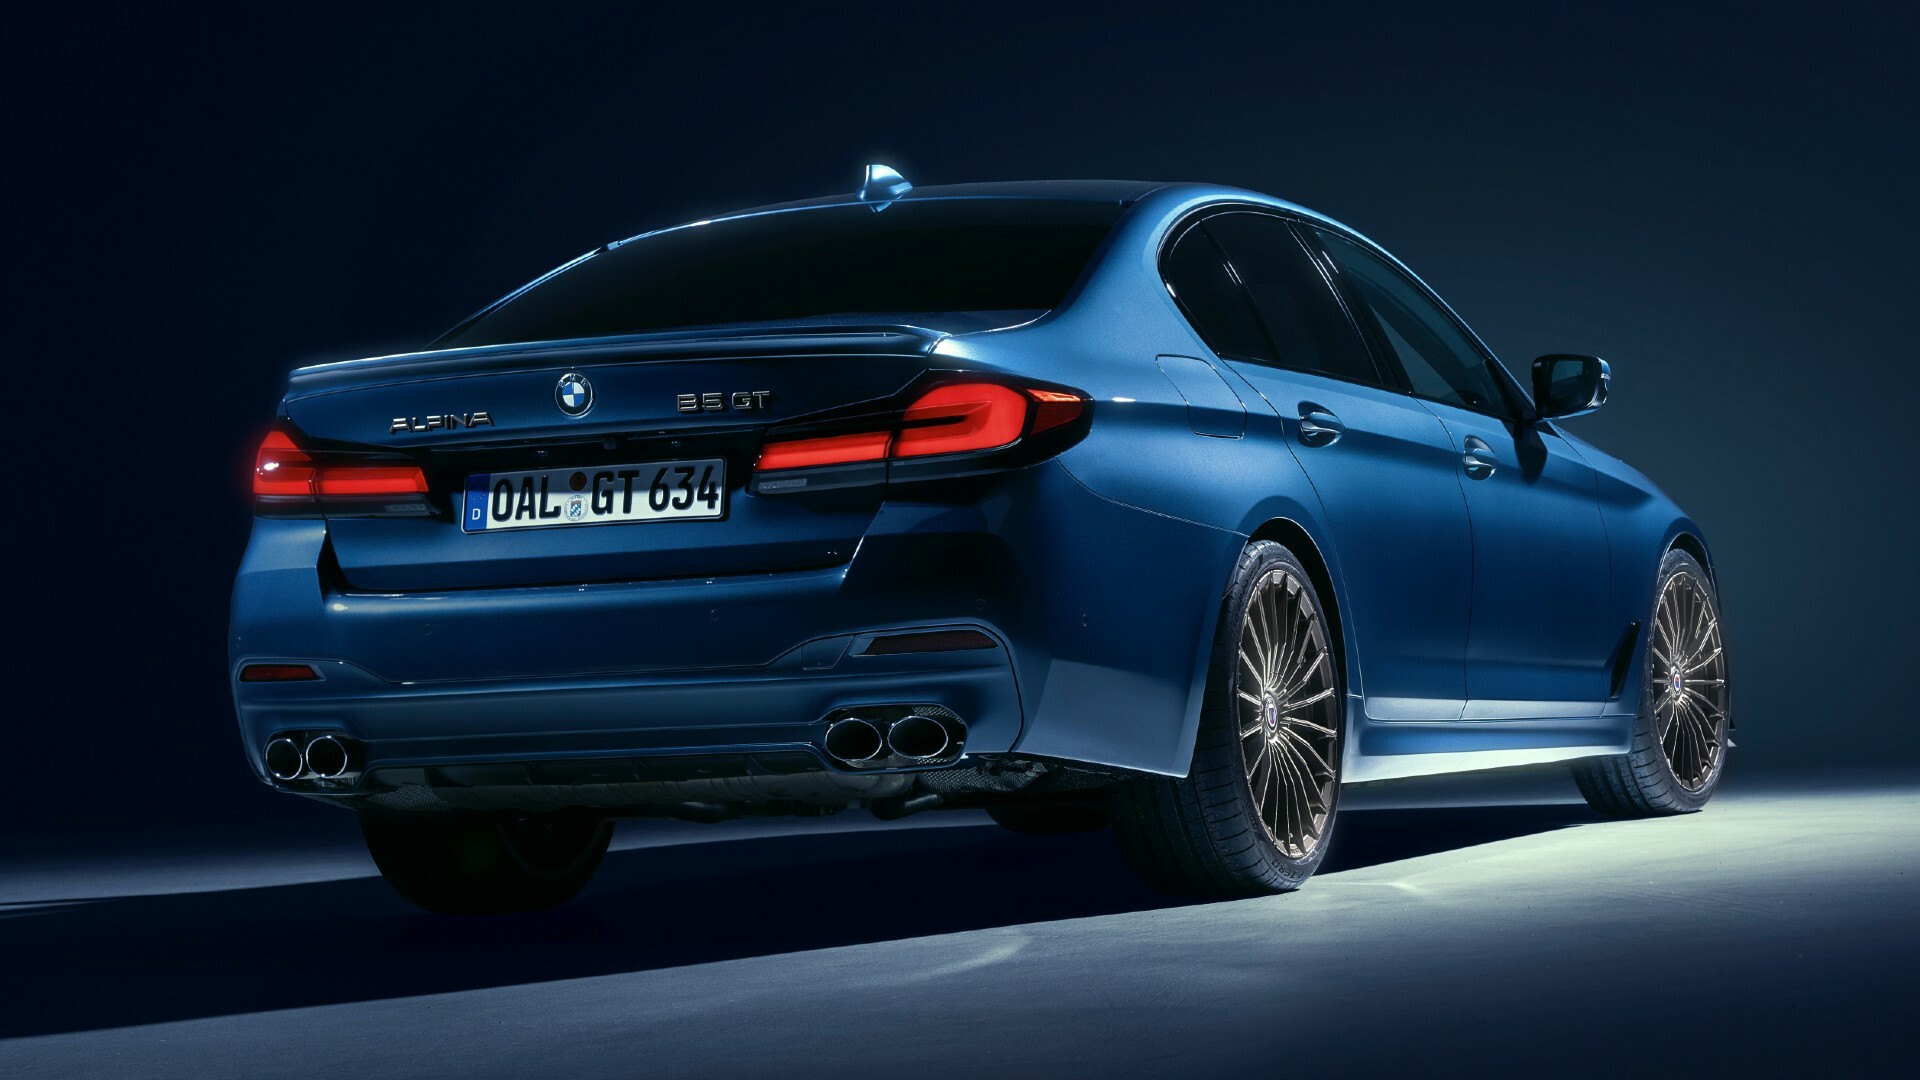 The 2023 BMW Alpina B5 GT outperforms the M5.